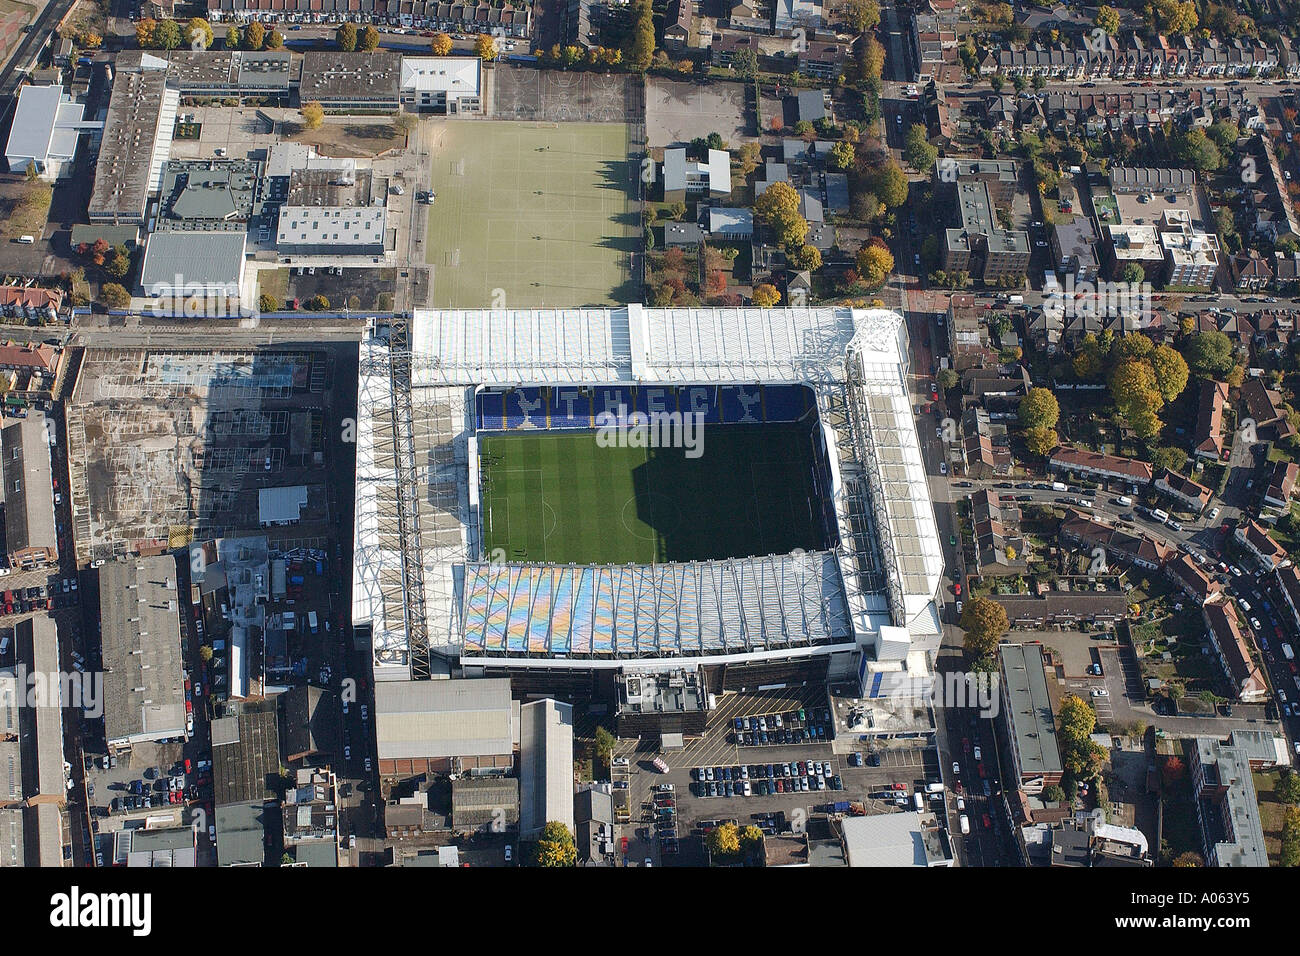 Aerial view of Tottenham Hotspur Football Club in London. It is also called White Hart Lane and is home to Spurs Stock Photo